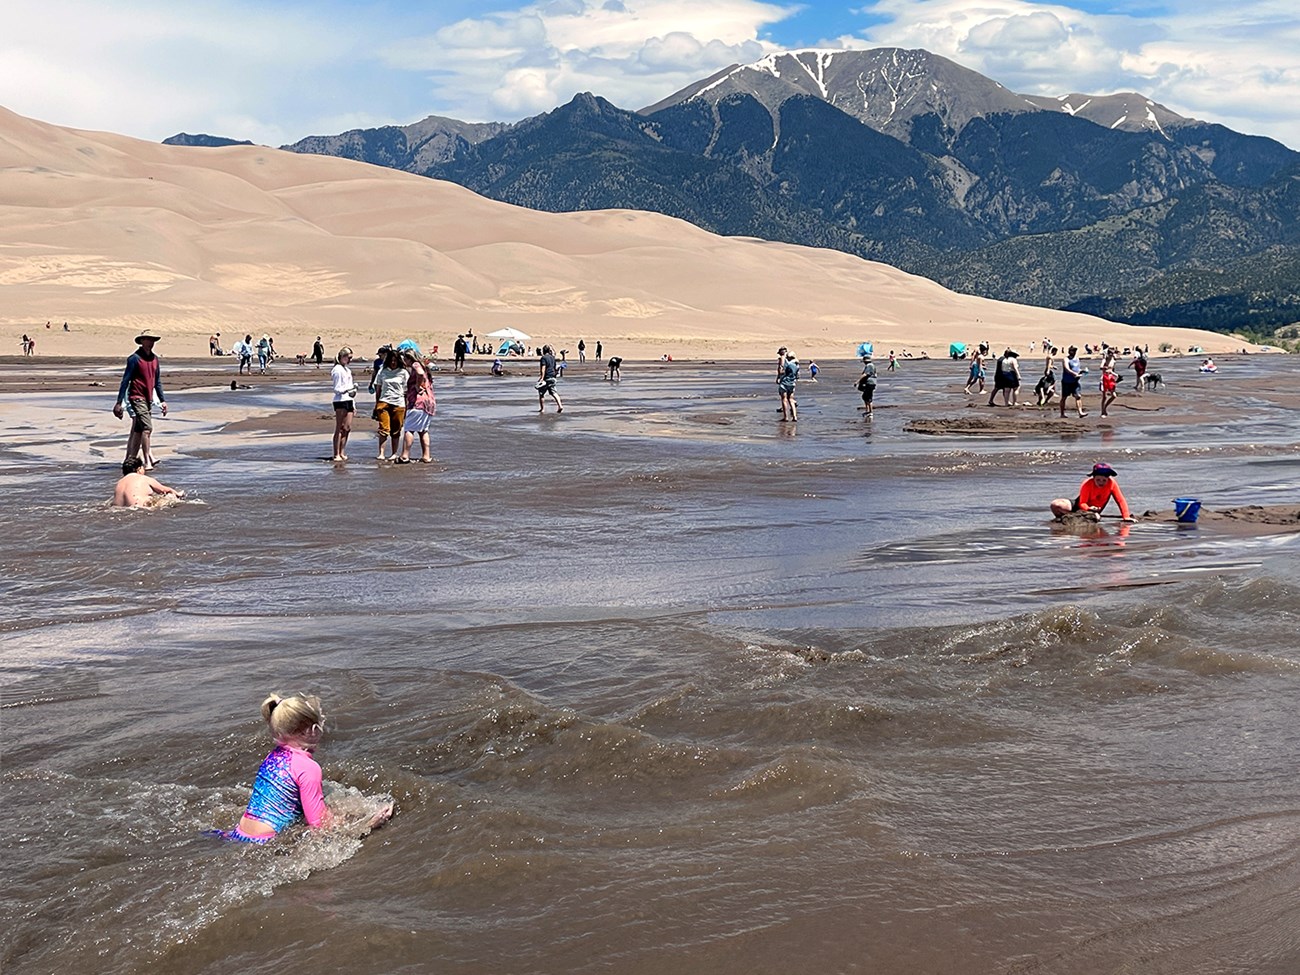 A wide shallow stream flowing at the base of dunes and mountain with lots of visitors playing